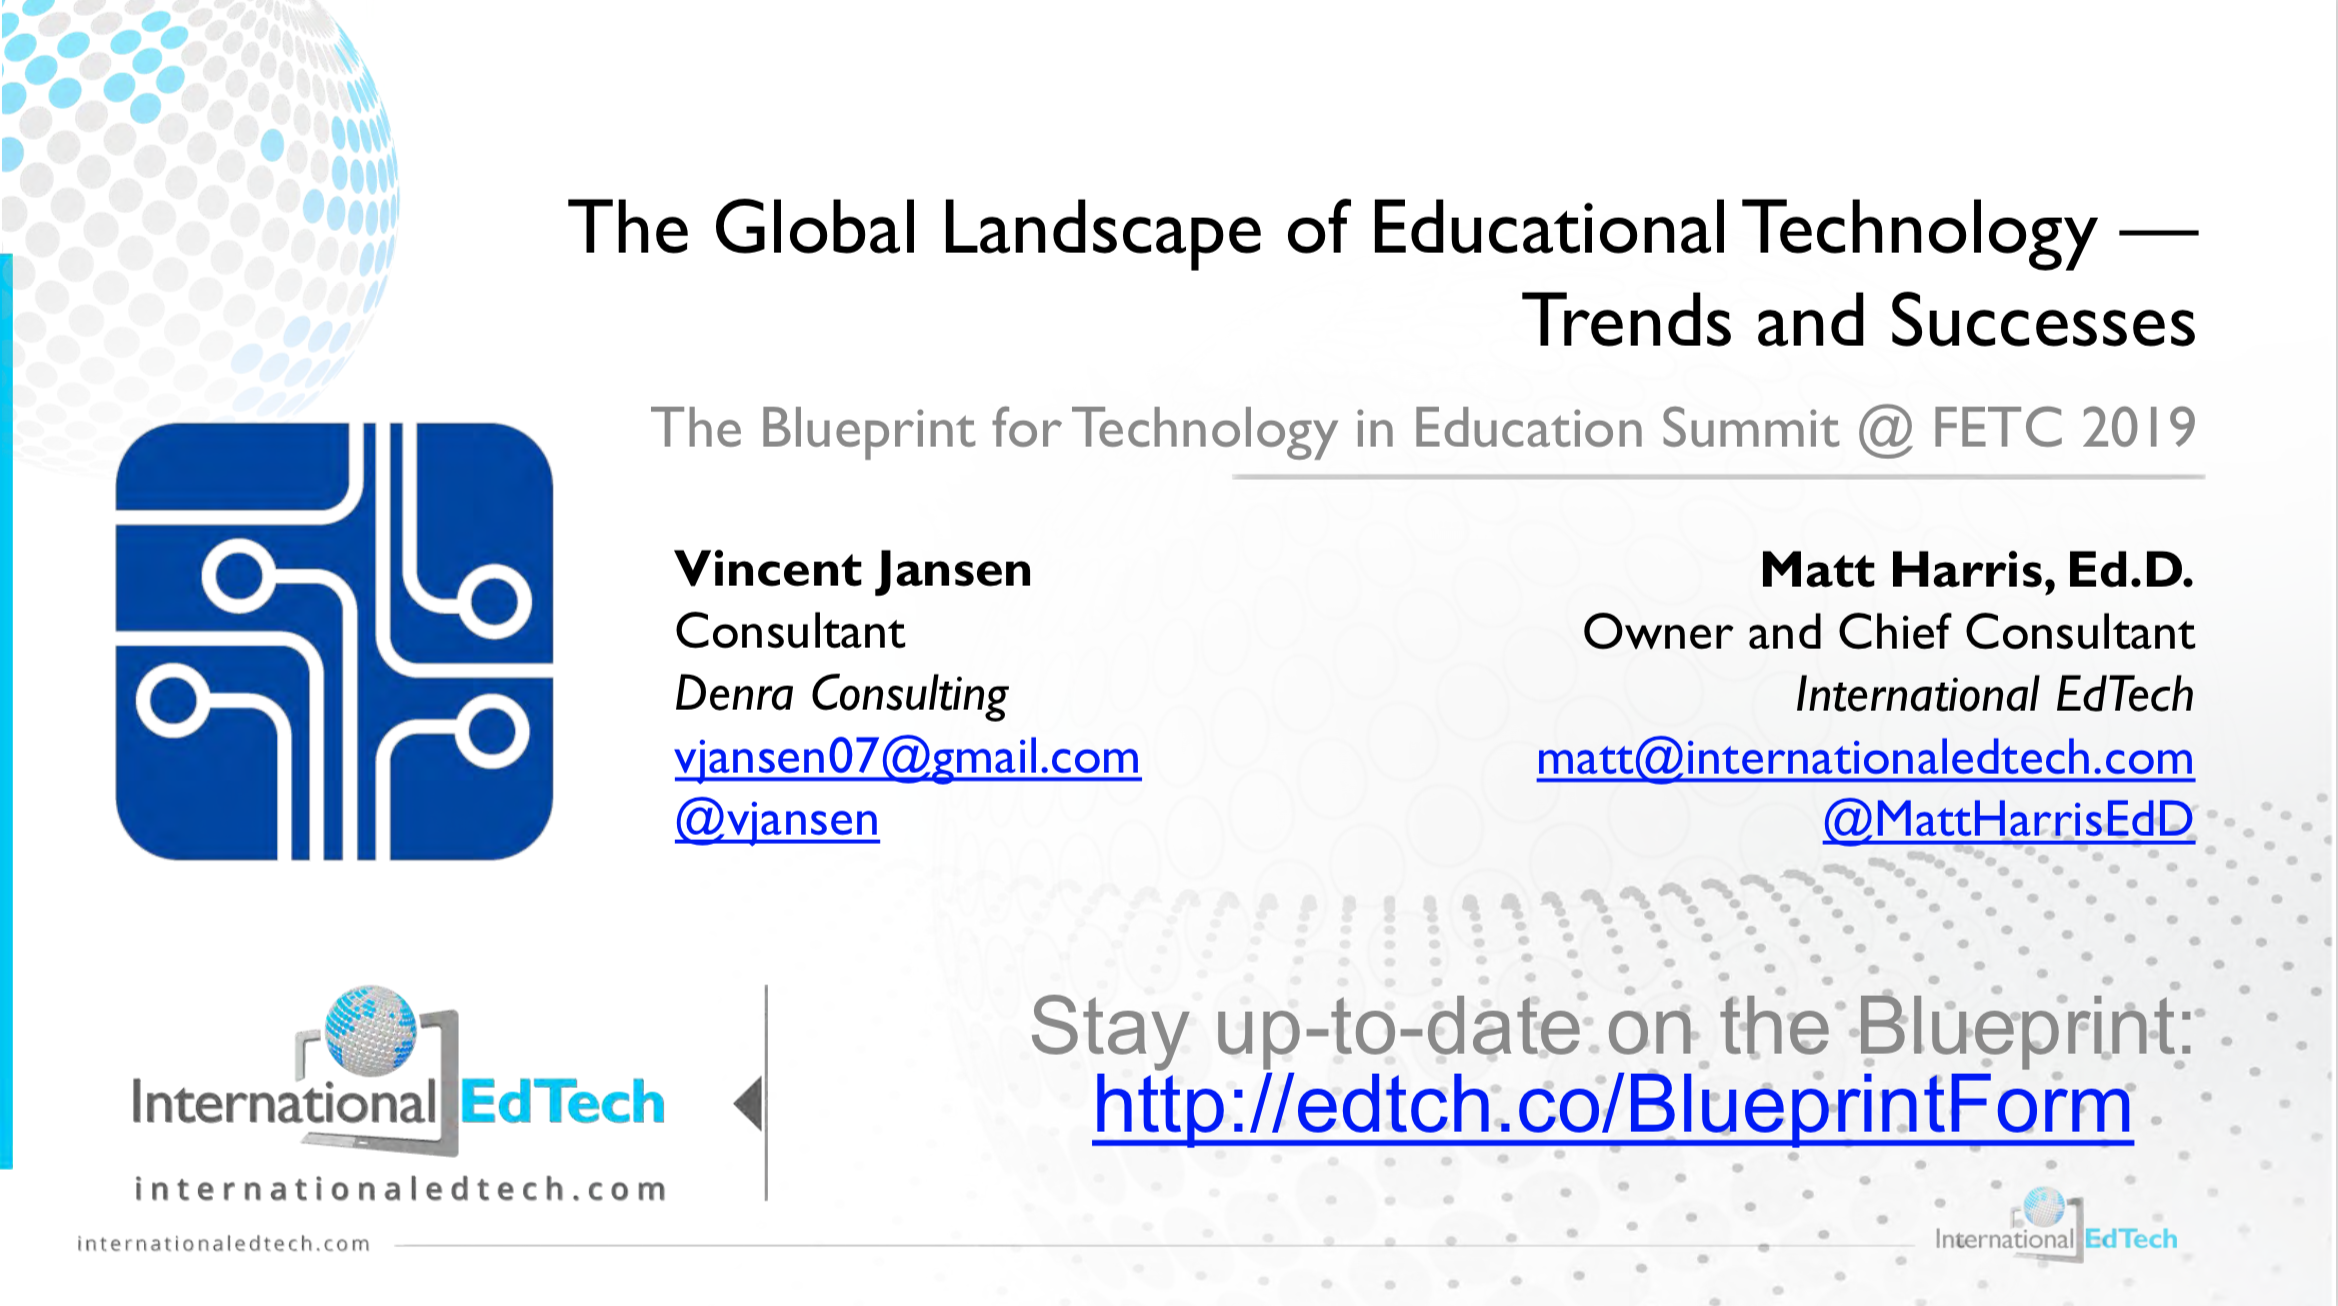 The Global Landscape of Educational Technology - Trends and Successes - FETC 2019